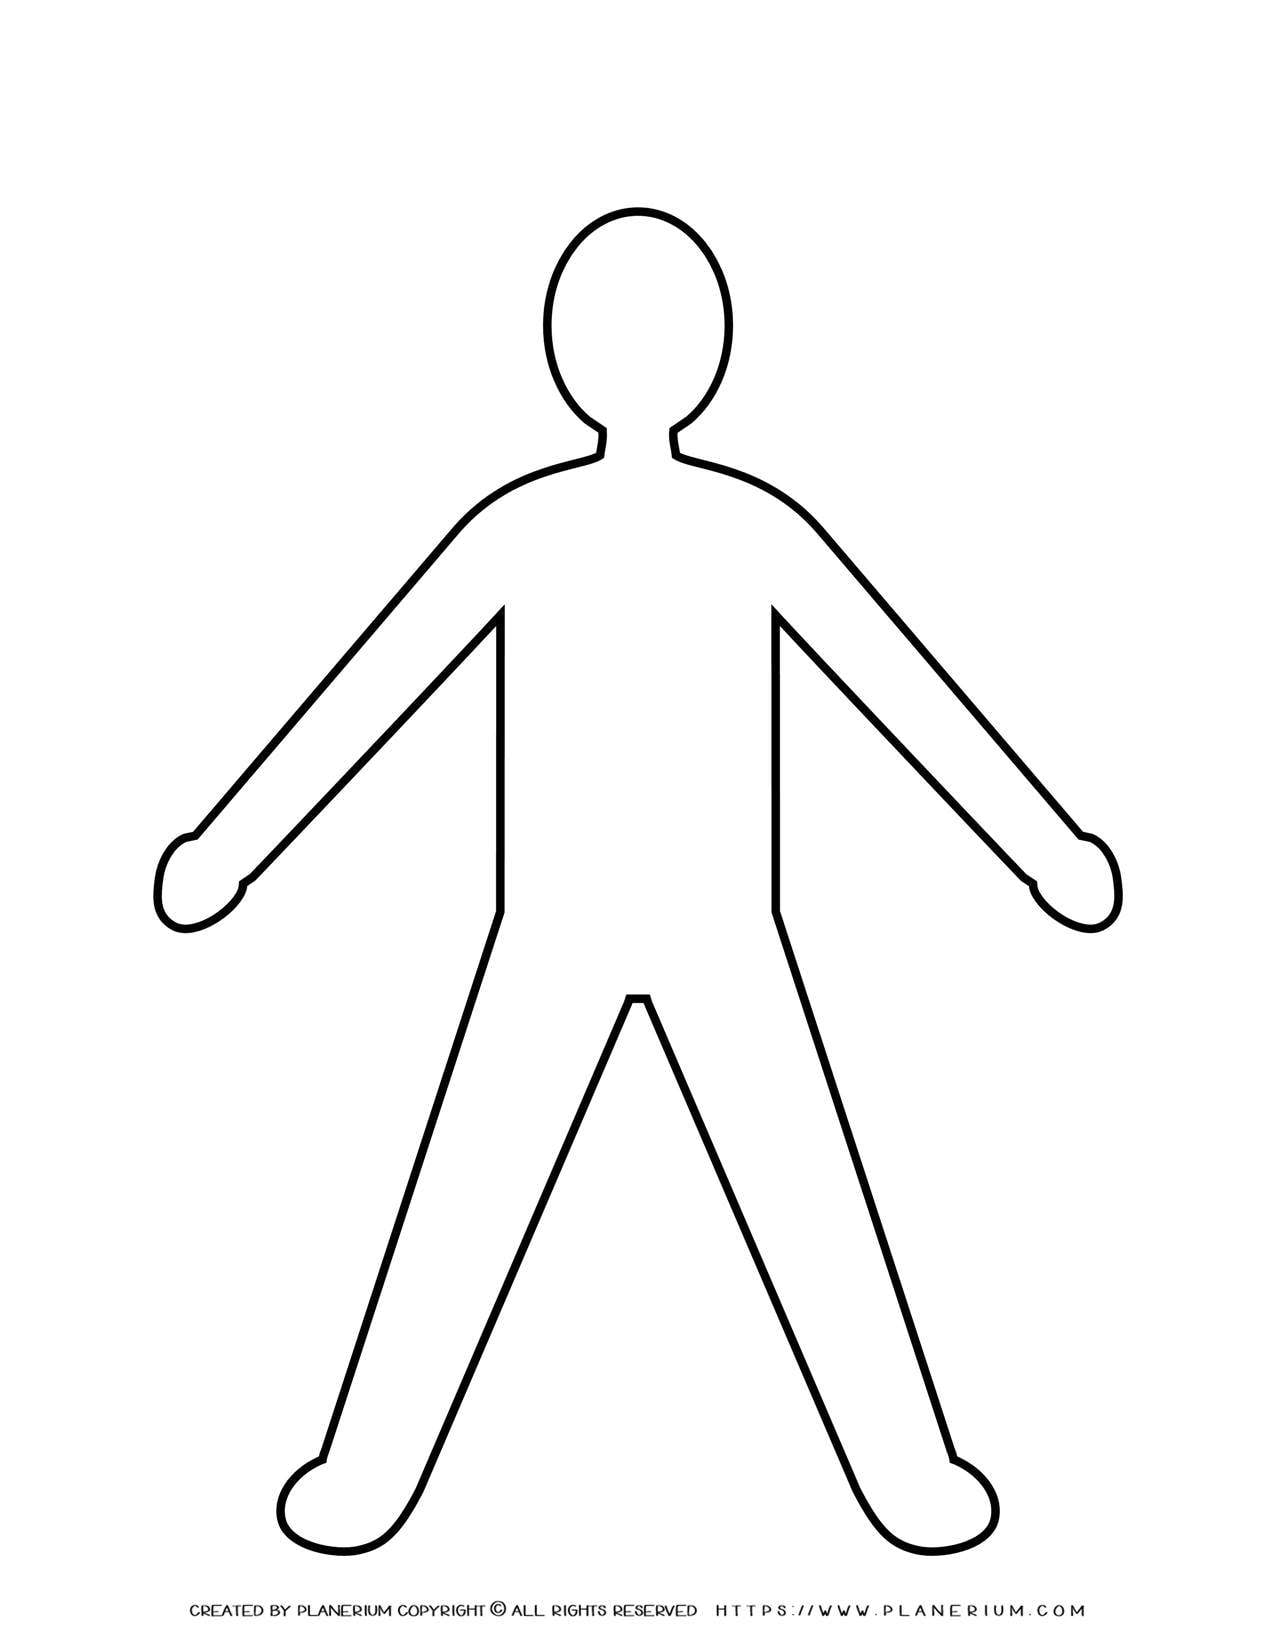 Man Spread Legs and Arms Silhouette | Planerium